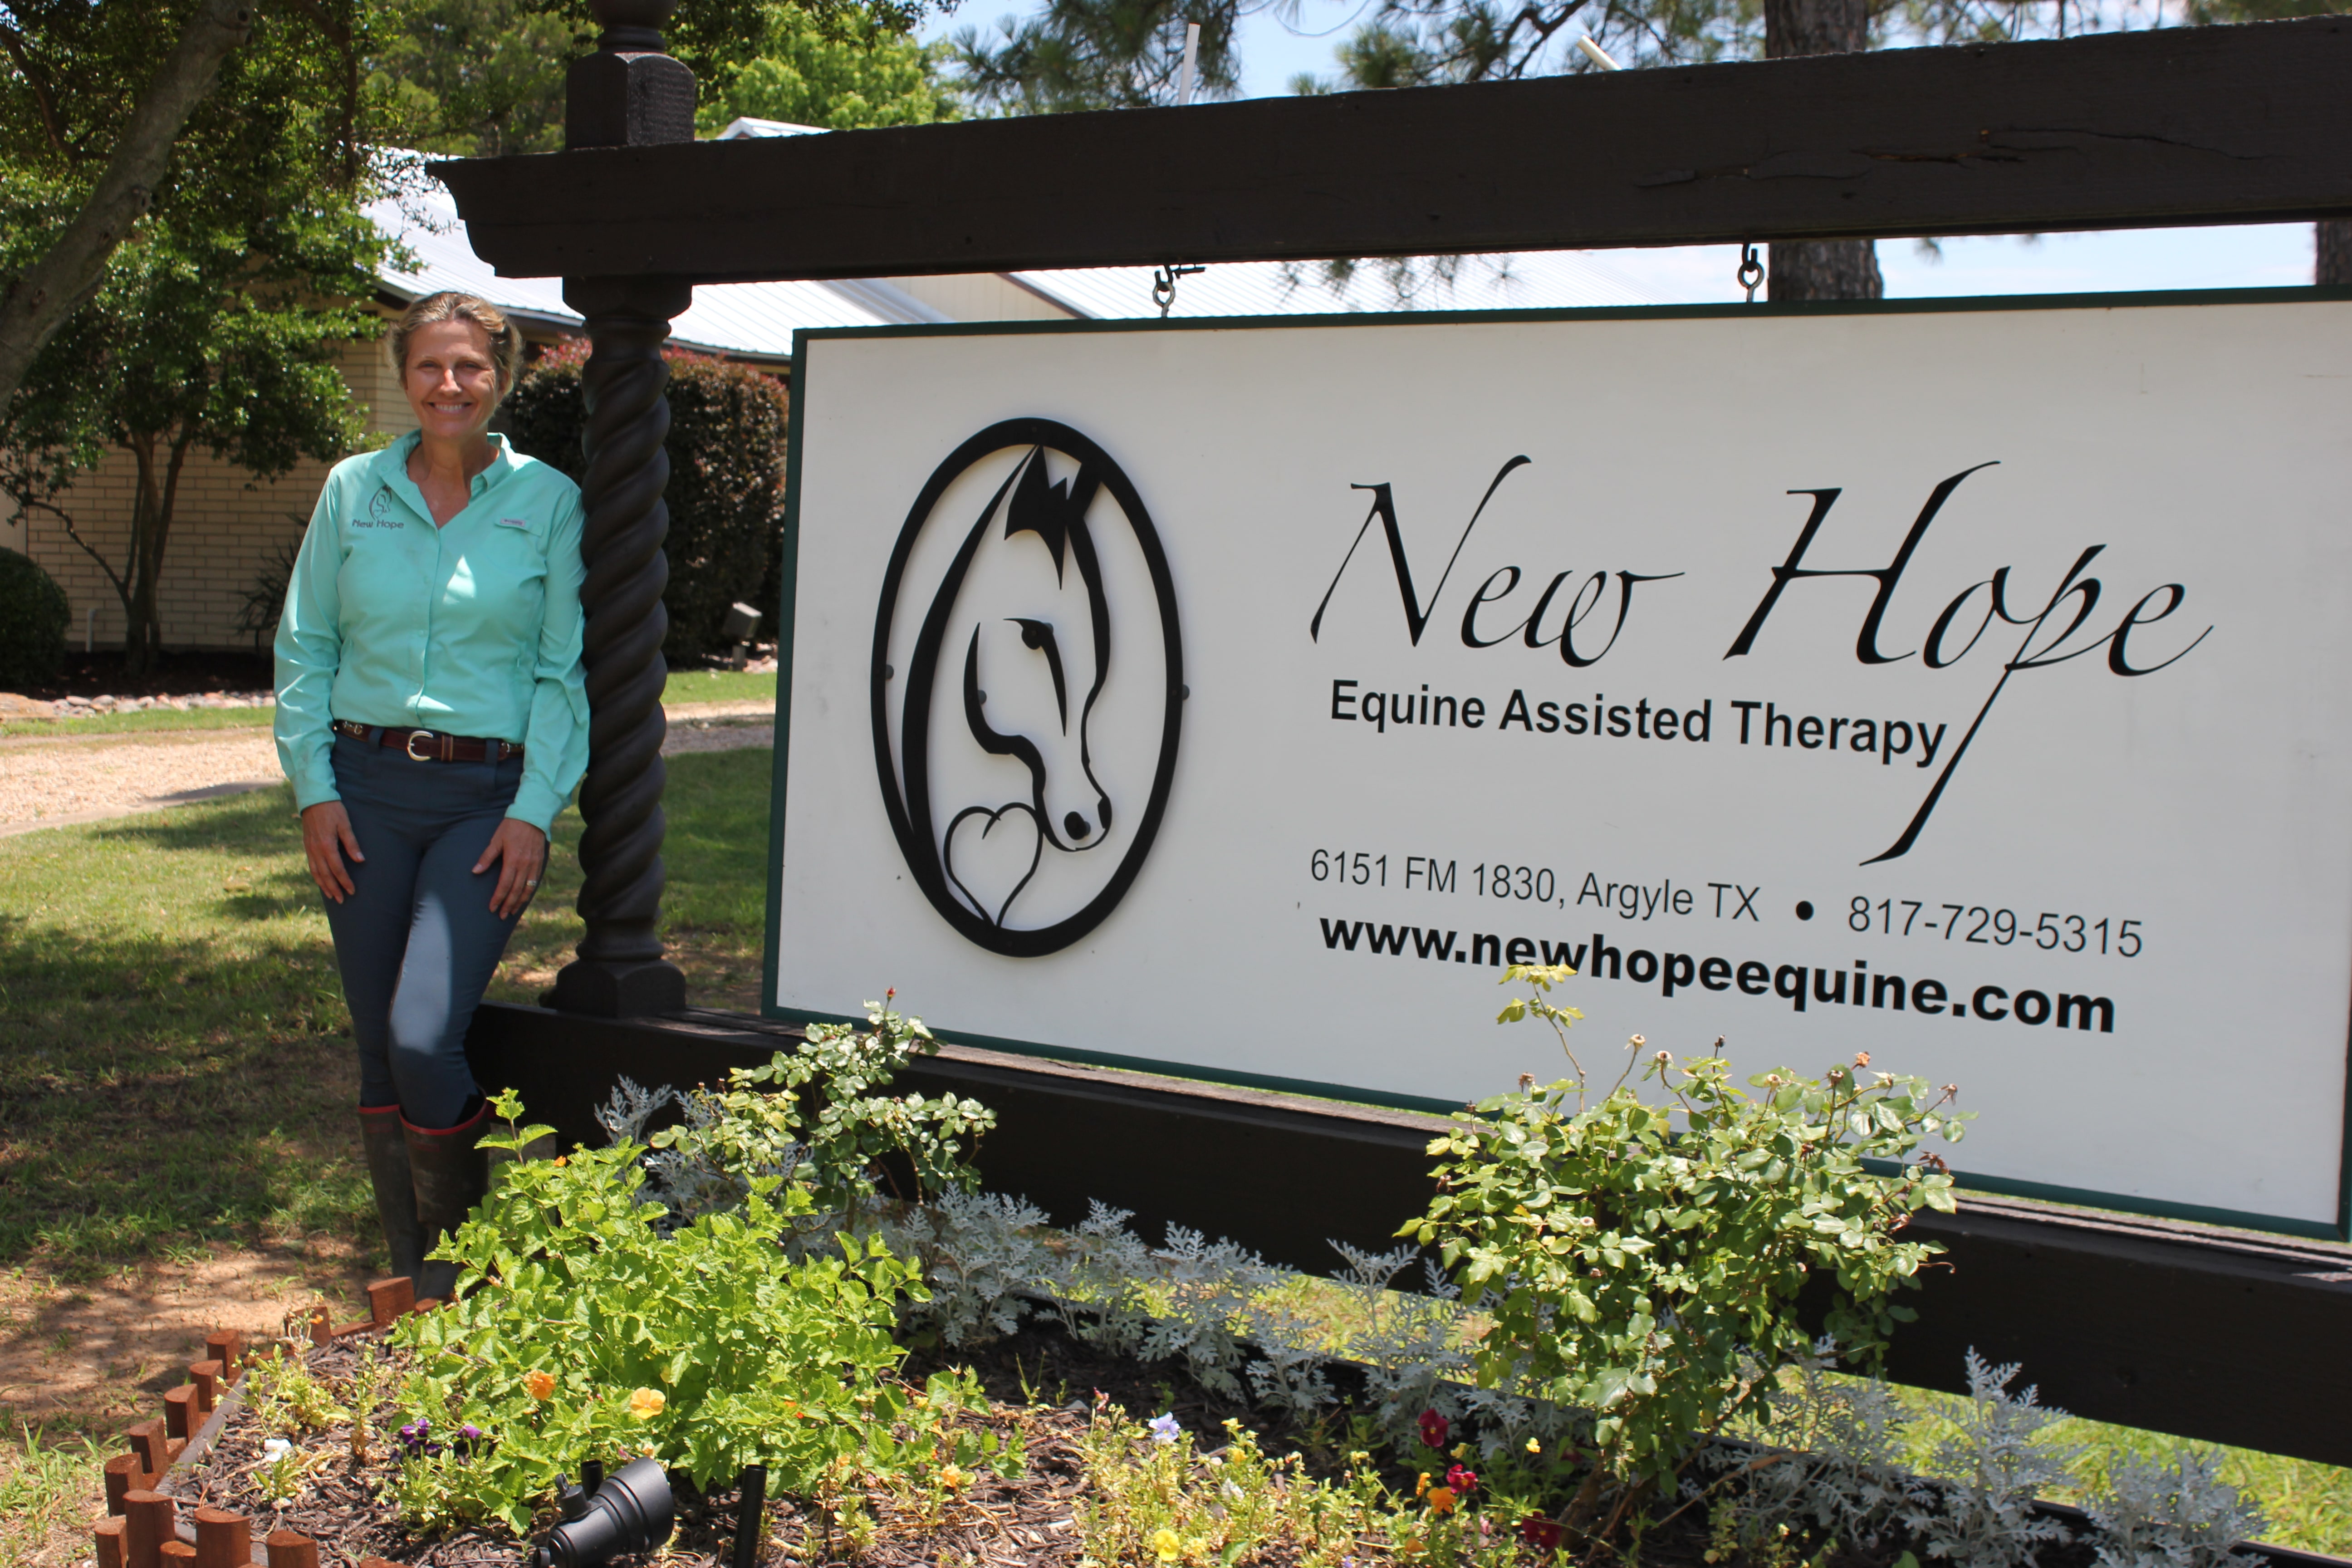 Local equine therapy center is helping build supportive connections